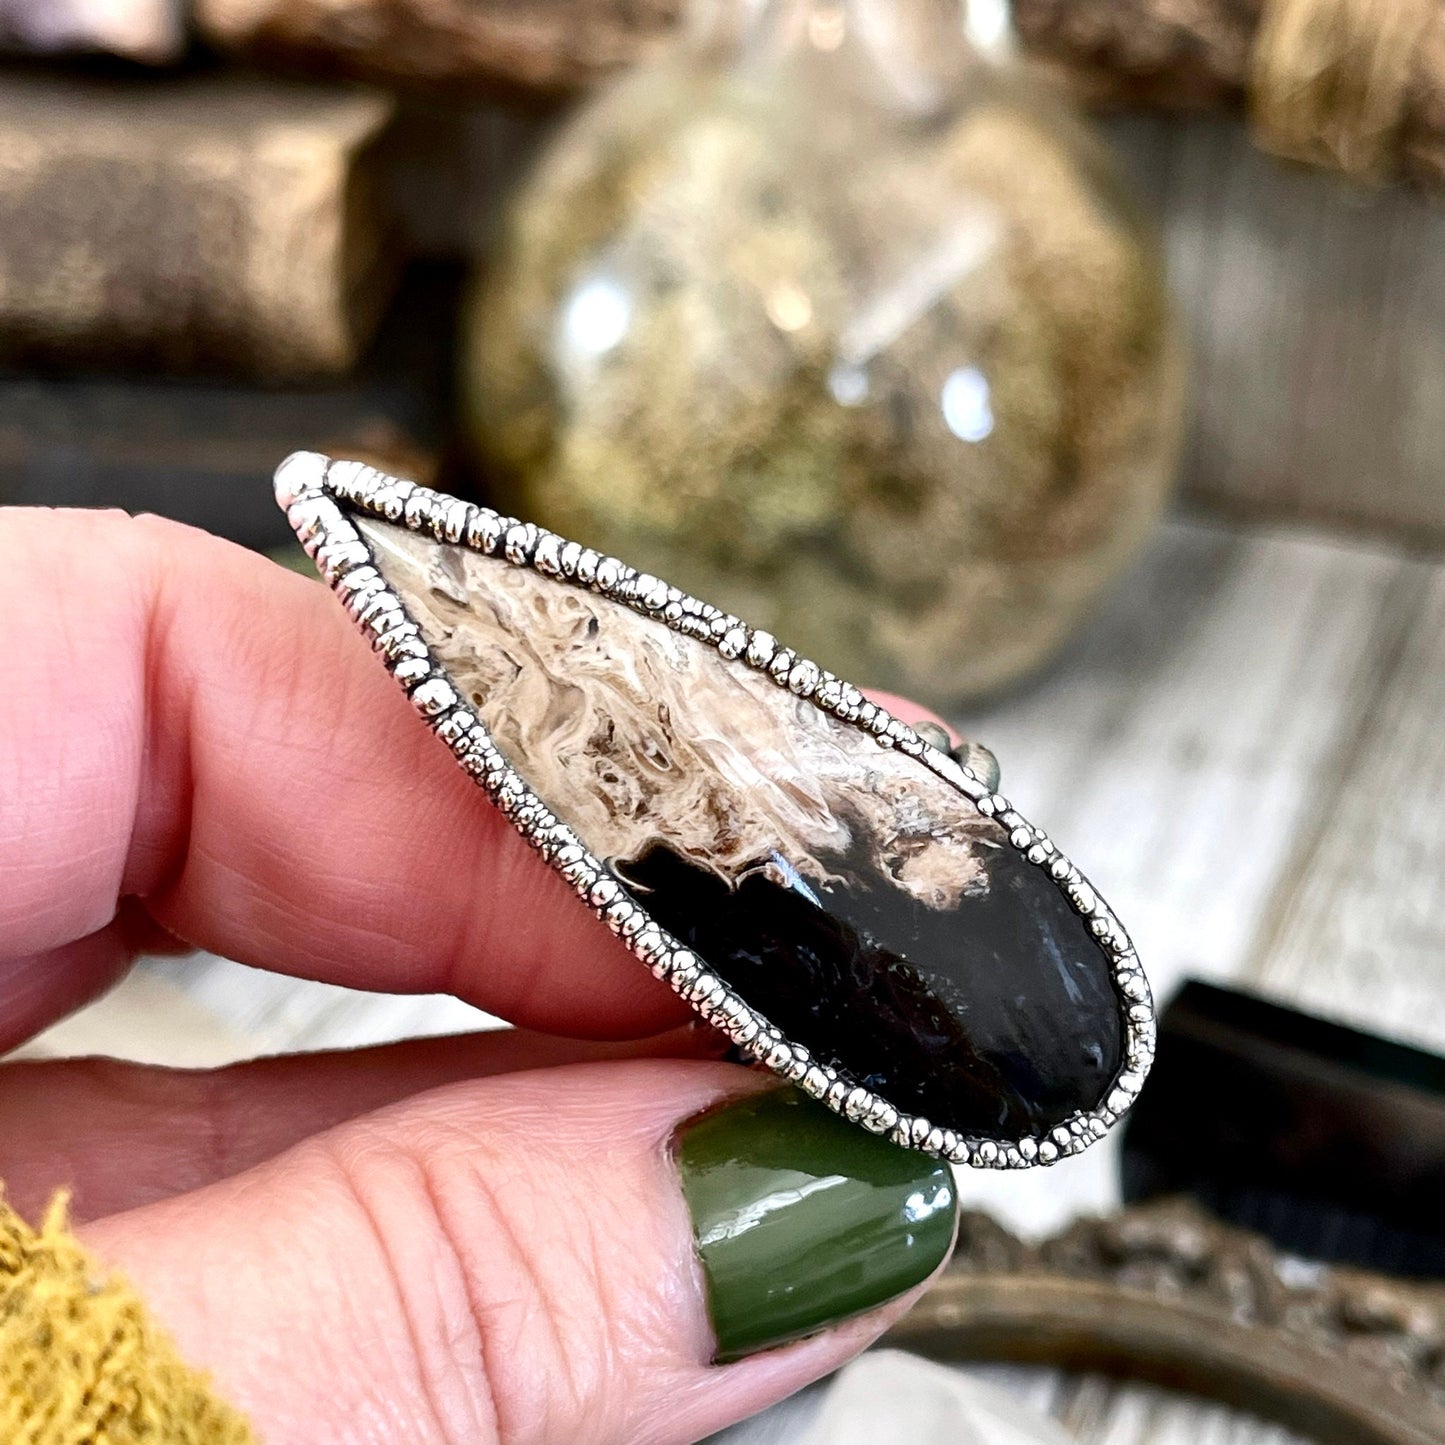 Unique Size 7 Large Fossilized Palm Root Statement Ring in Fine Silver / Foxlark Collection - One of a Kind - Foxlark Crystal Jewelry